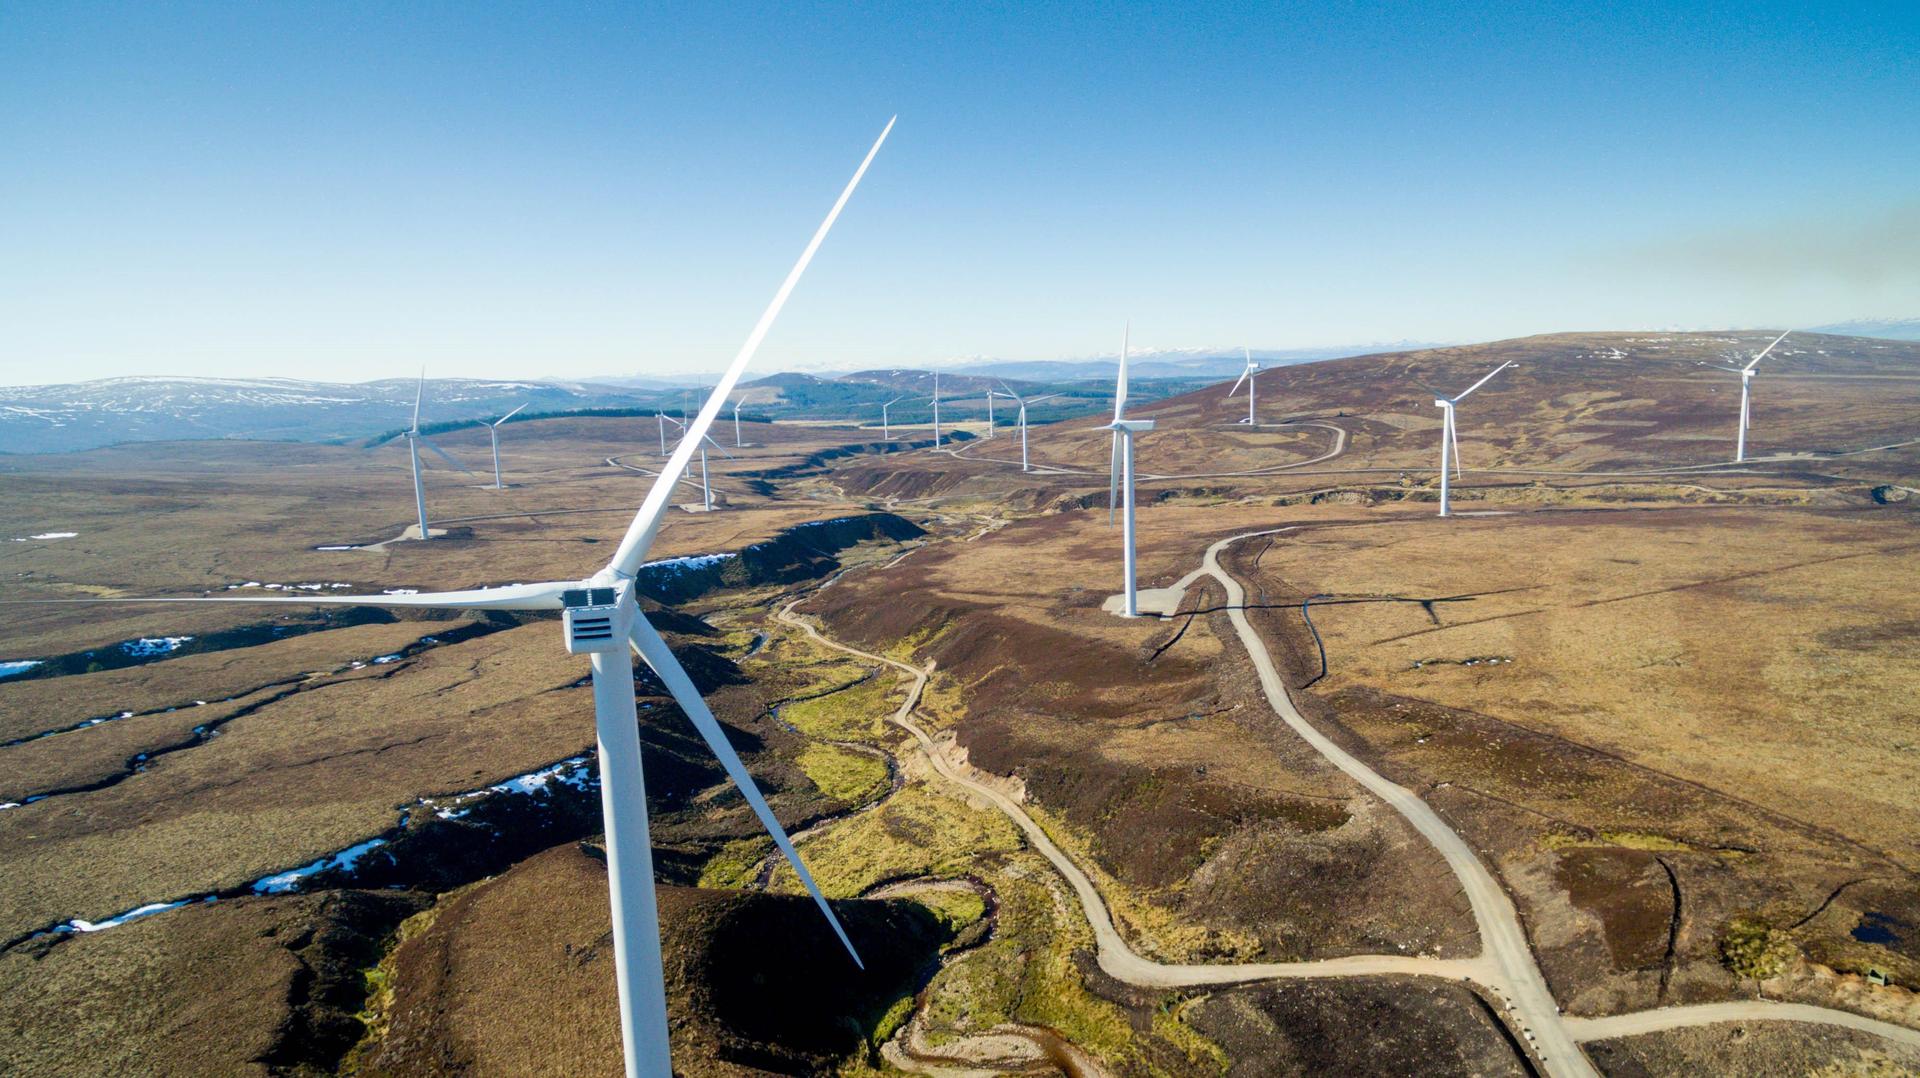 Thanks, in part, to this wind farm in Moy, Scotland, Mars reduced its greenhouse gas emissions by 25 percent in 2015. The company hopes to entirely eliminate it carbon emissions by the year 2040.